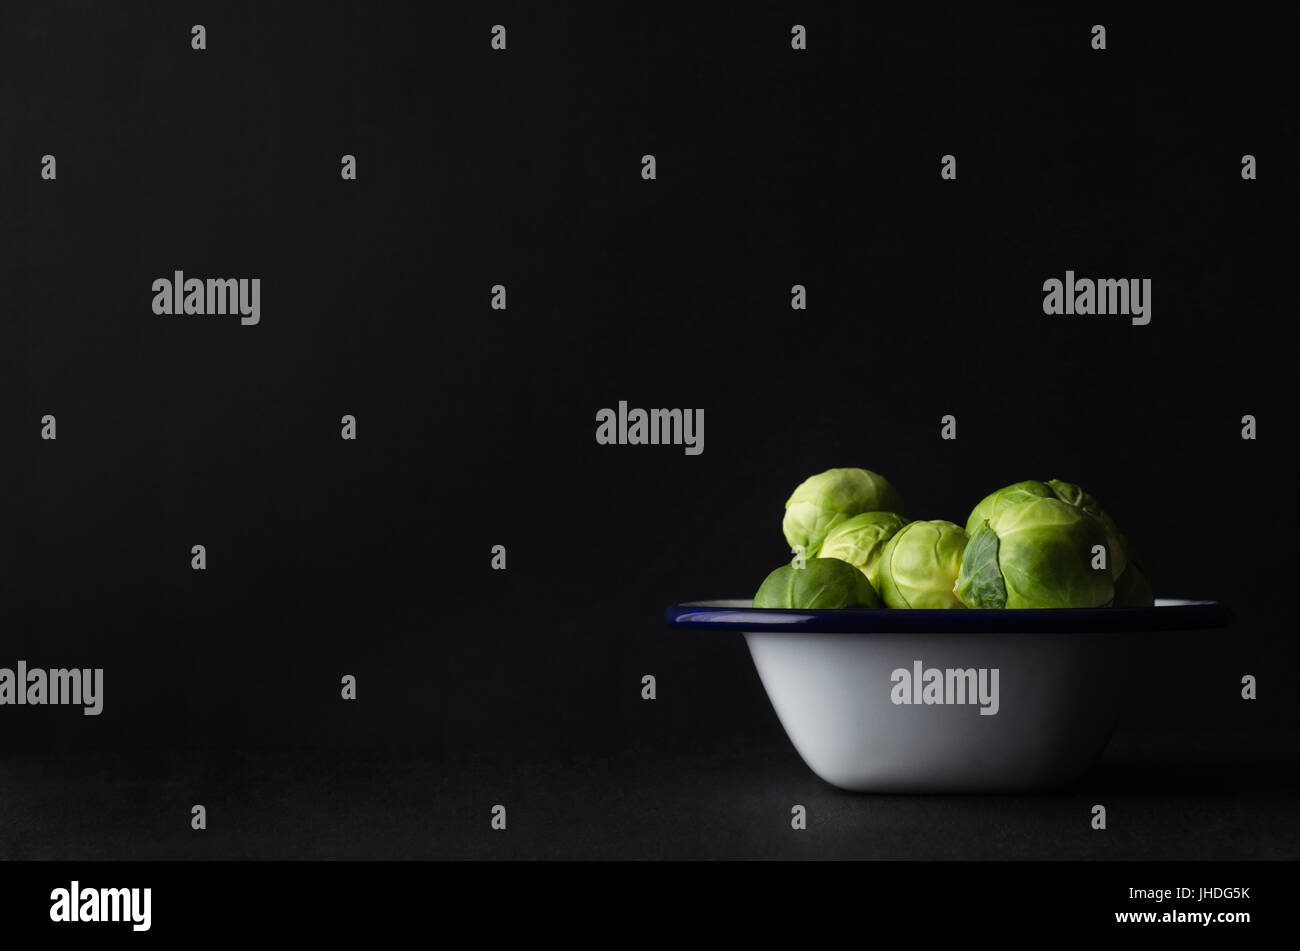 Brussel Sprouts, piled up high in a white and blue enamel baking tin on black surface.  Chalkboard background provides copy space to left and above. Stock Photo